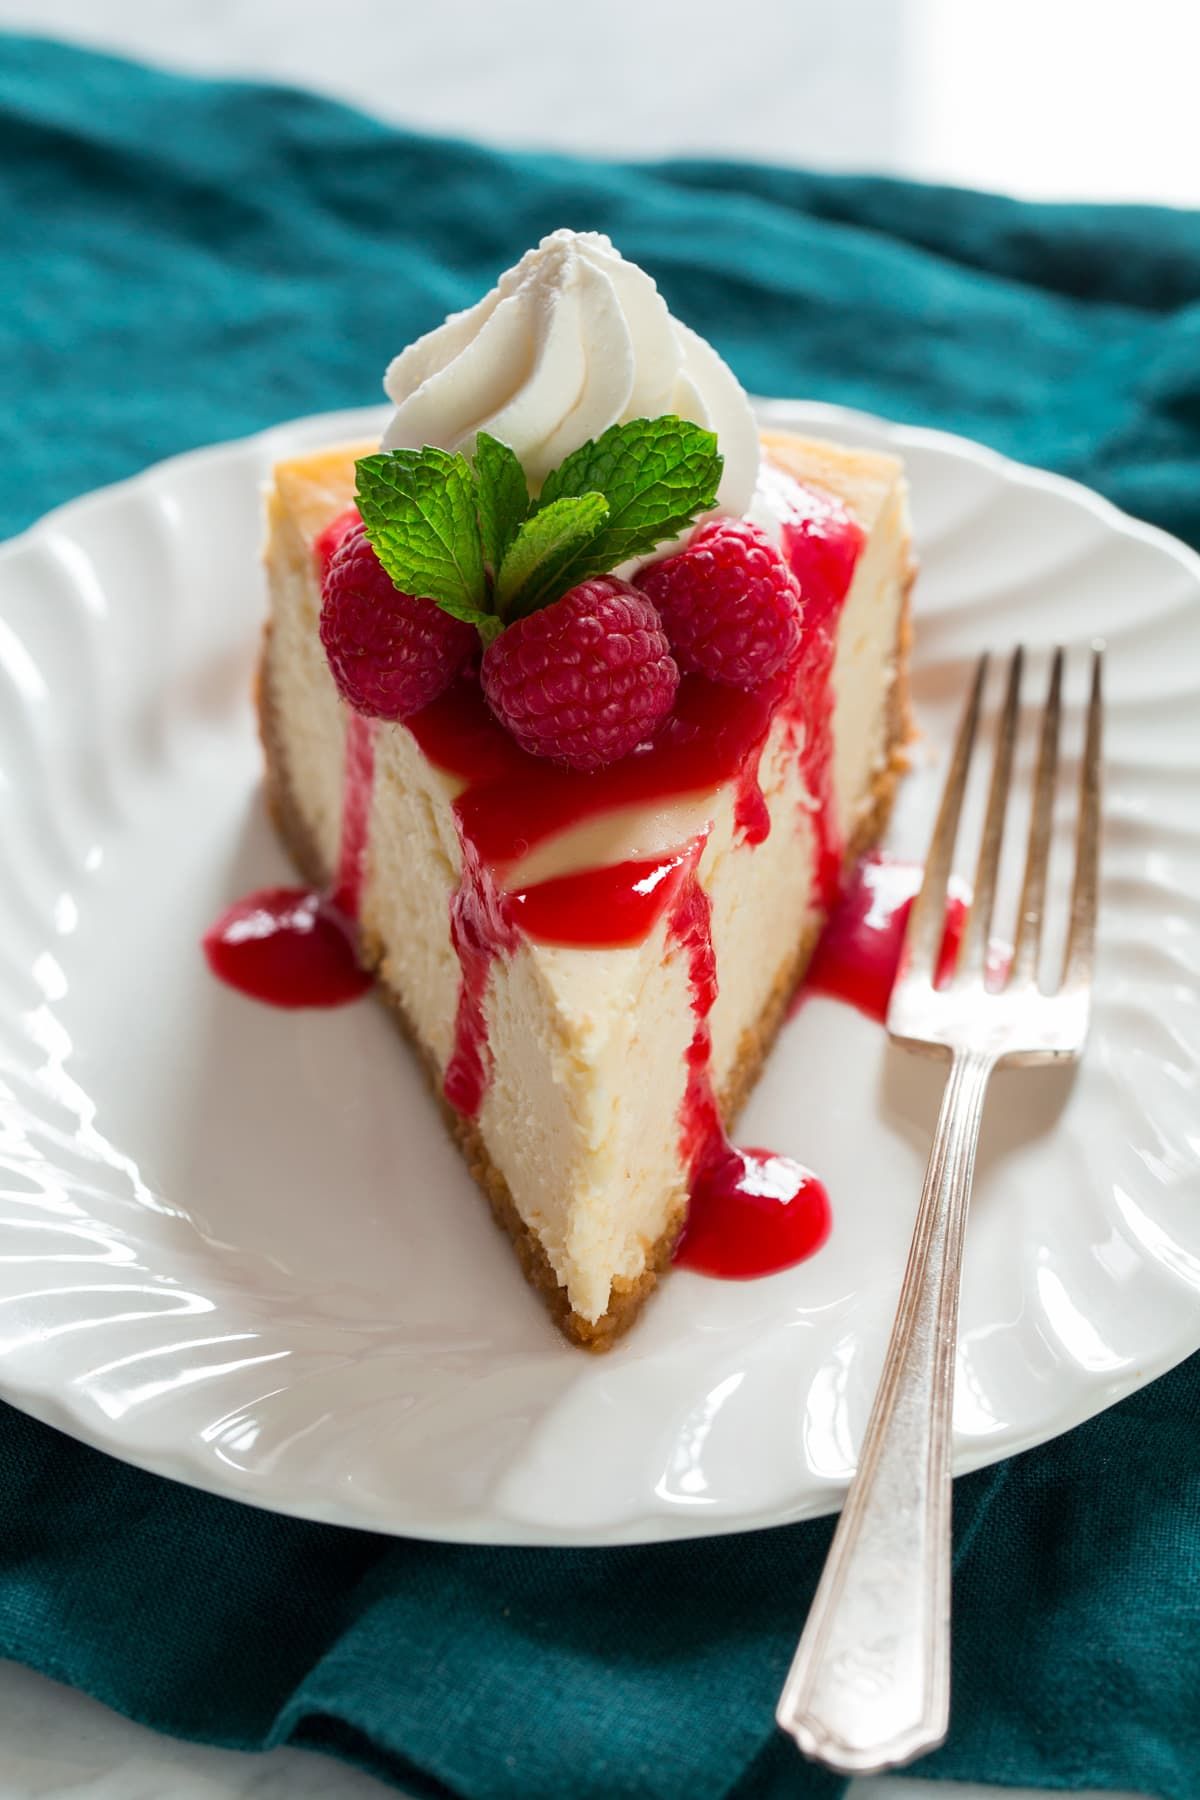 How Long To Cook Cheesecake